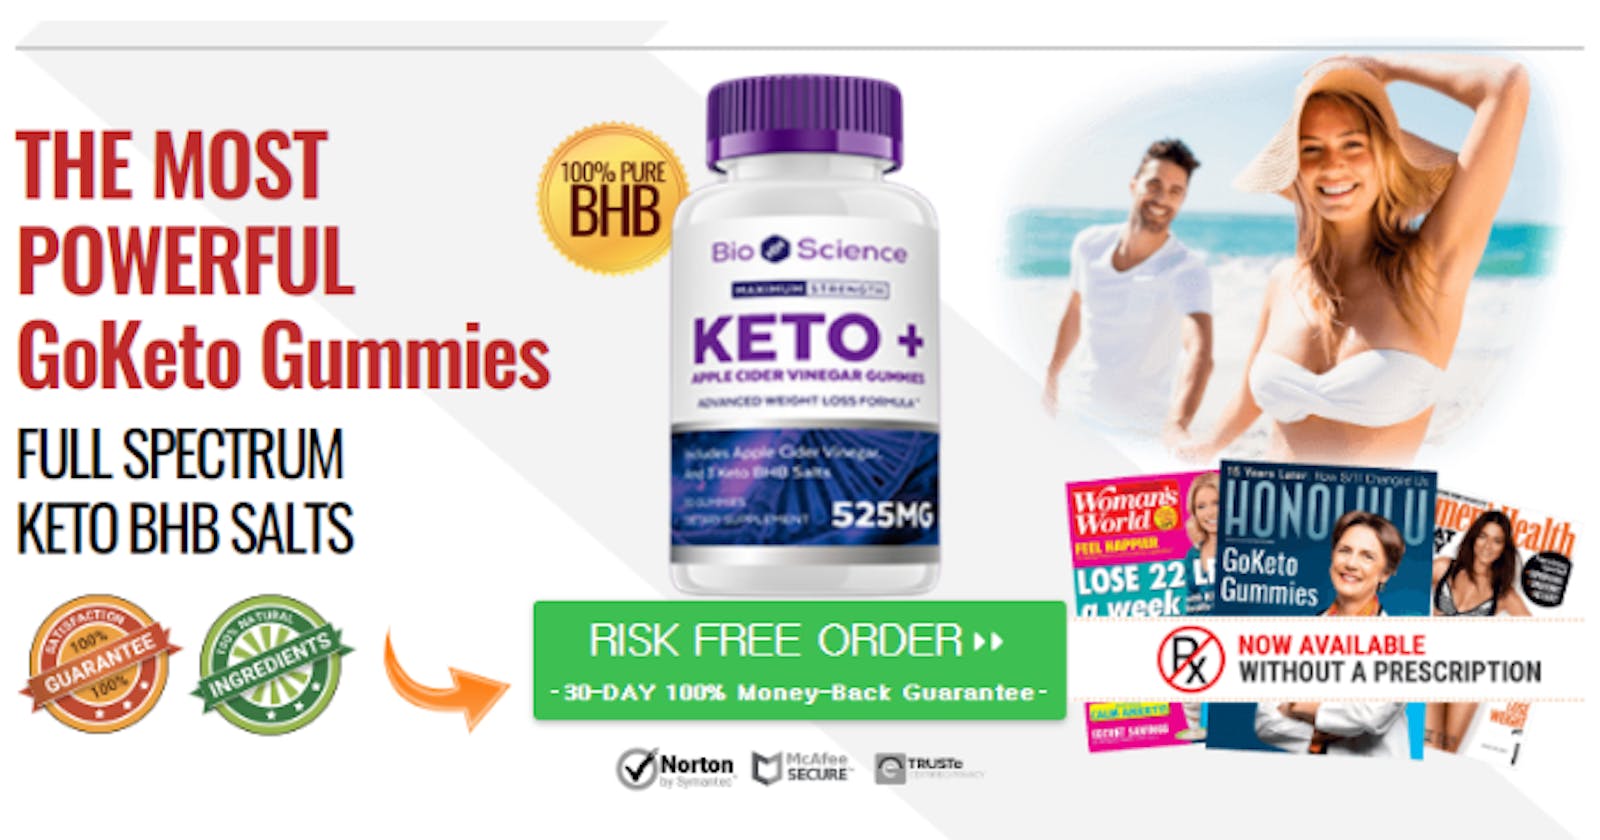 Bioscience keto gummies Reviews Weight Loss Pills is it trusted or Fake?